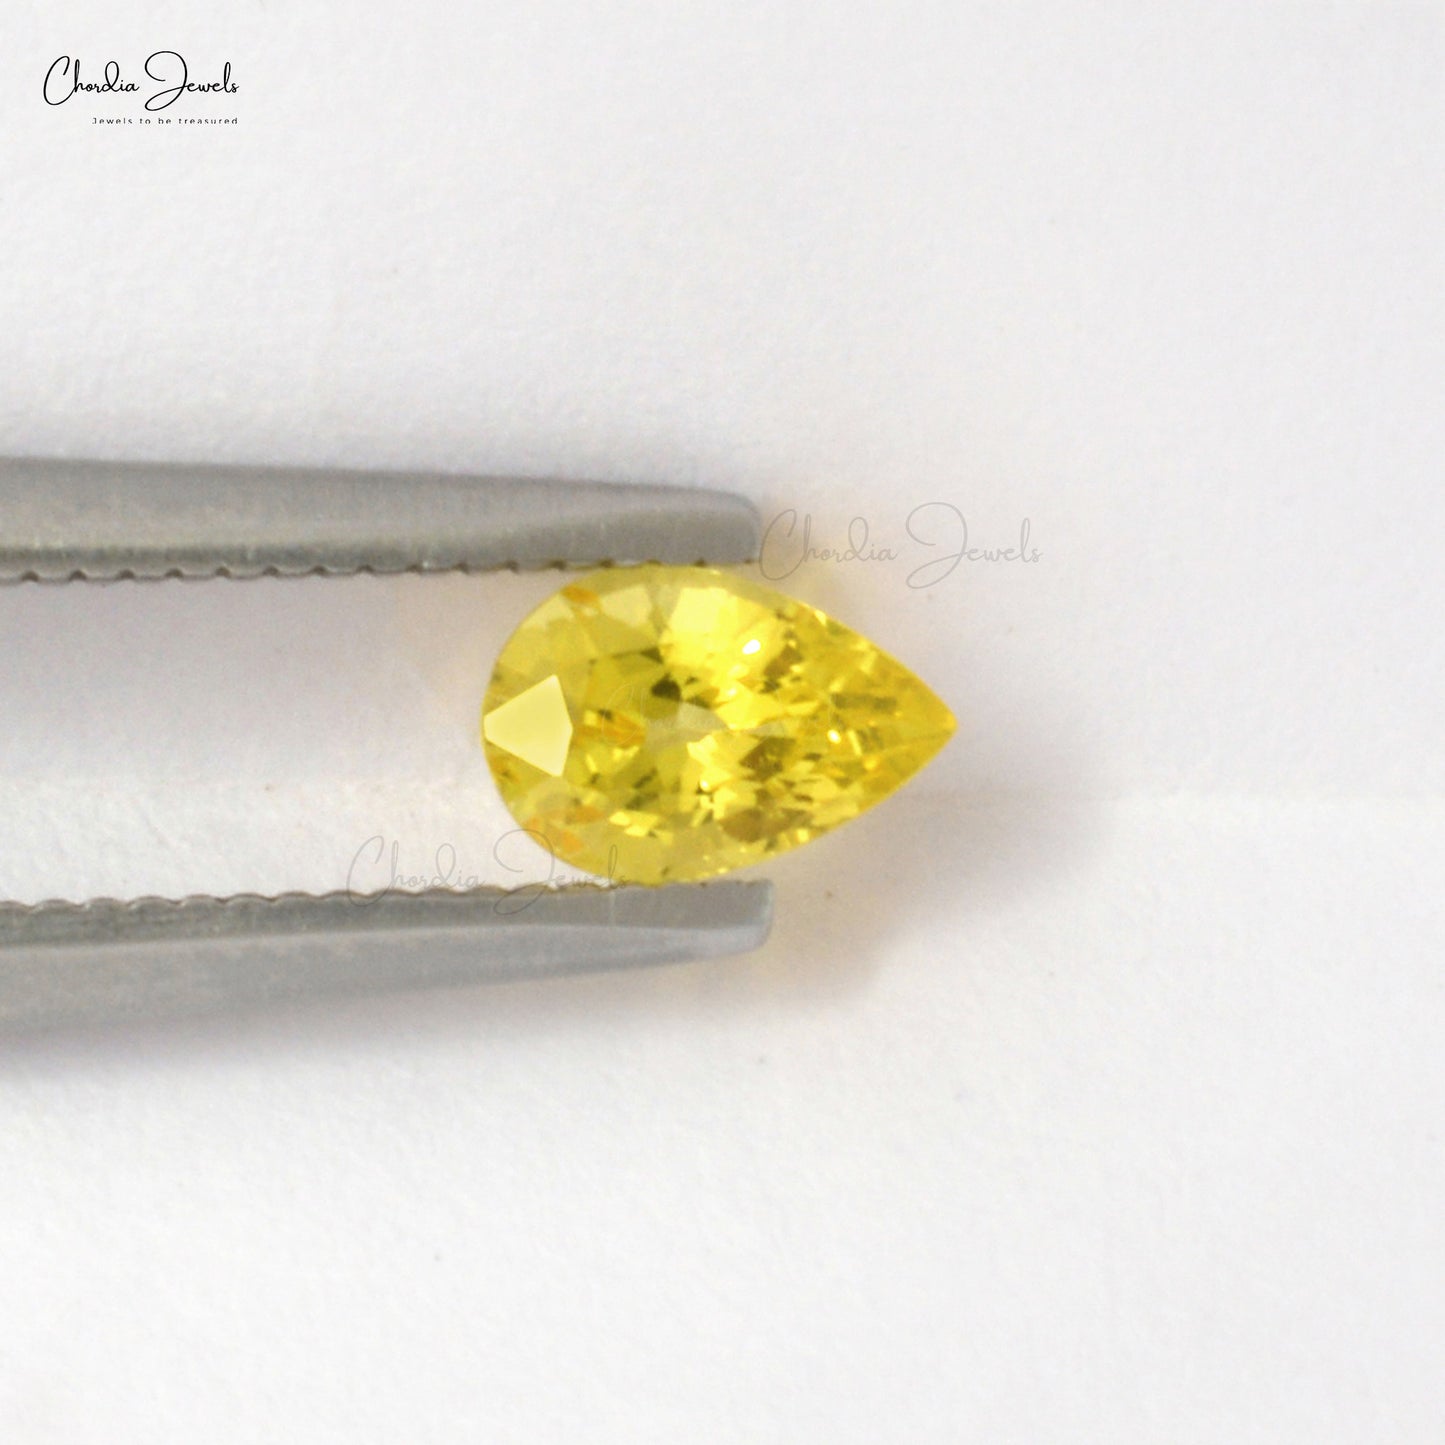 NATURAL PEAR-CUT YELLOW SAPPHIRE 8x6mm  LOOSE GEMSTONES FOR JEWELRY MAKING. Weight: 1.70 Carats, Stone Cut: Excellent,  Precious Gemstones from Chordia Jewels